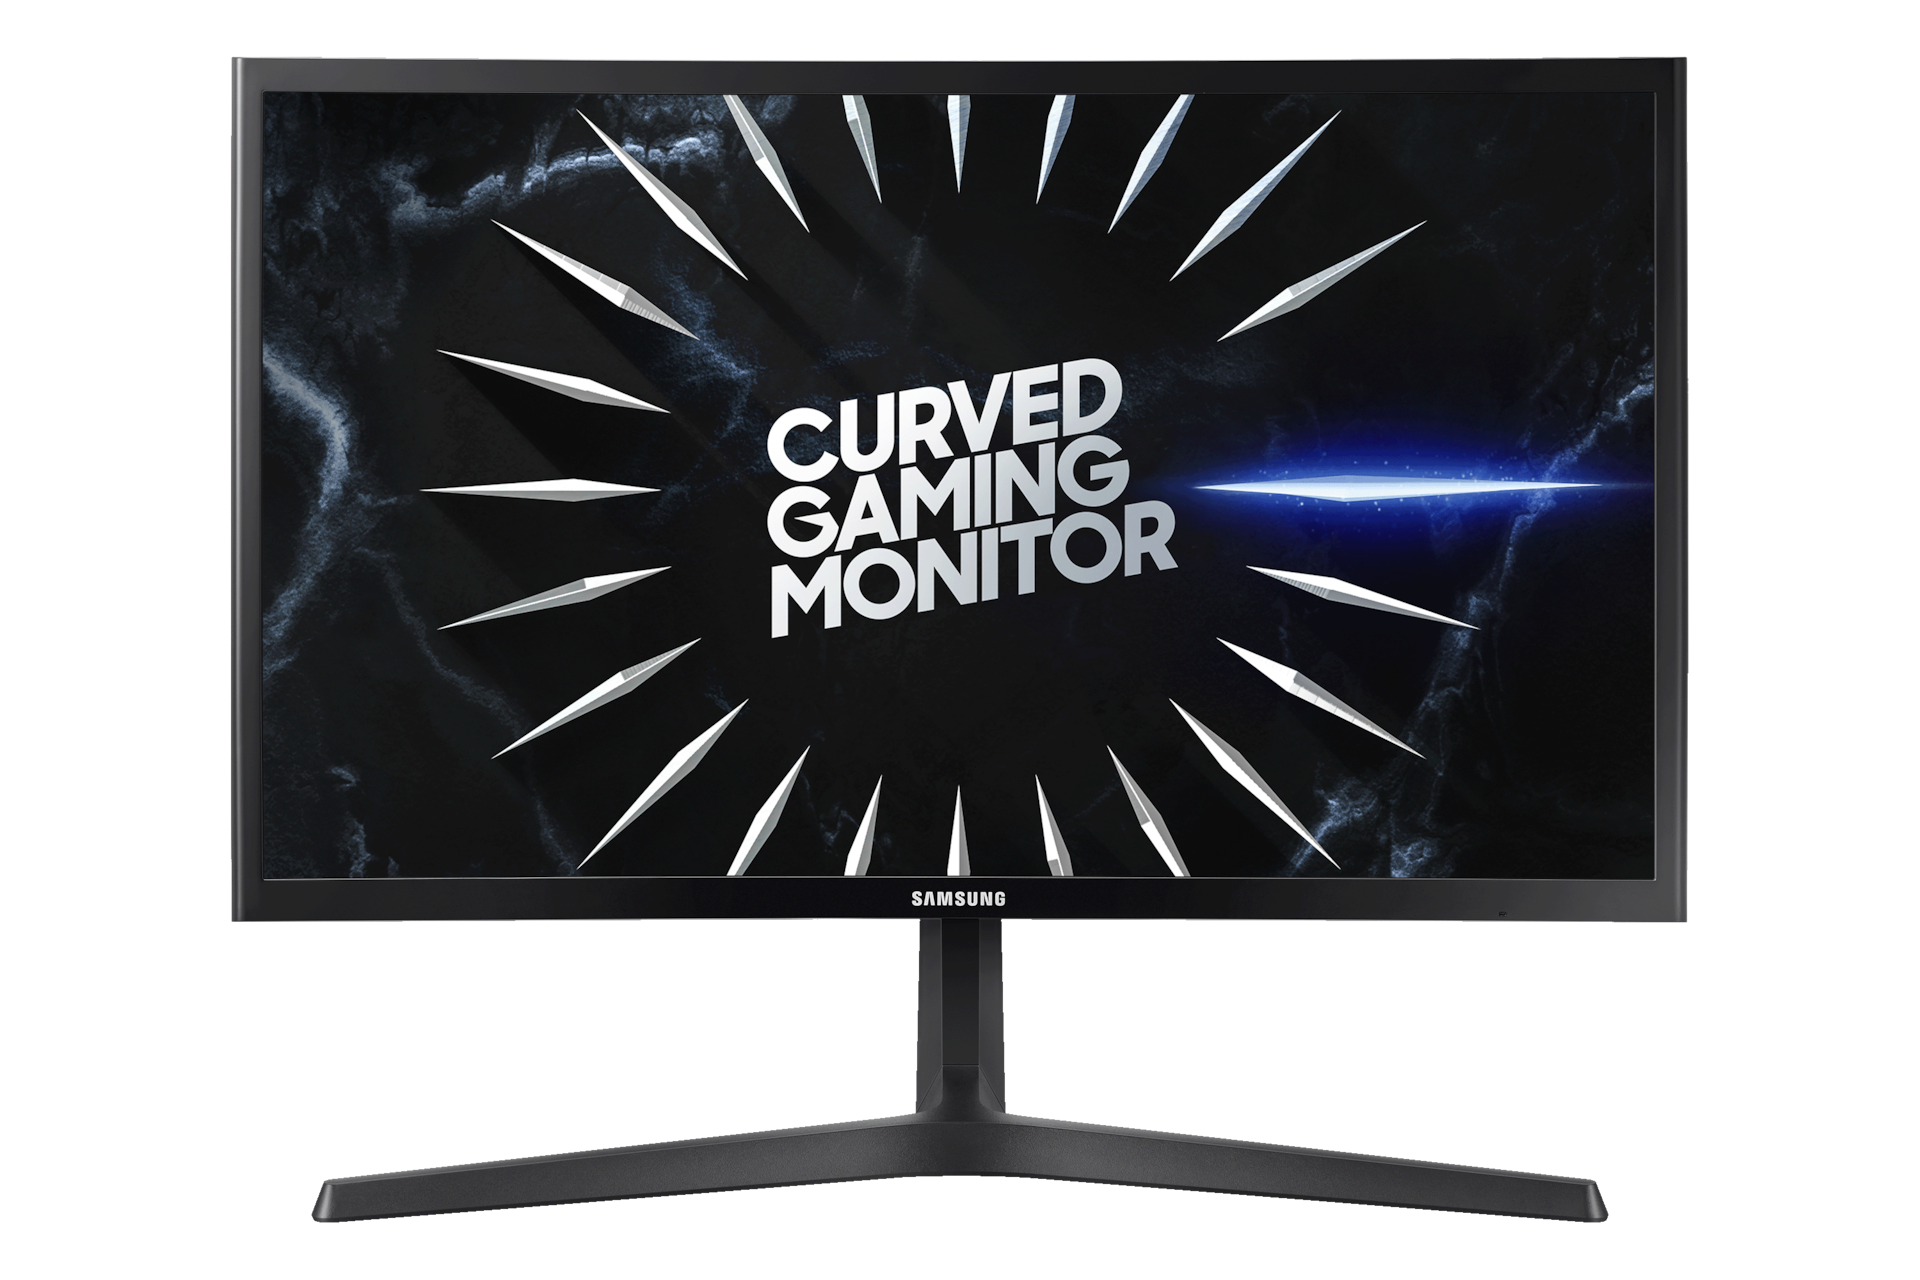 SAMSUNG 24 FHD 1080p CRG5 Curved Gaming Monitor, 144Hz, 4ms, Exclusive  Gamer Settings, AMD Radeon FreeSync, Eye Saver Mode, 3000:1 Contrast Ratio